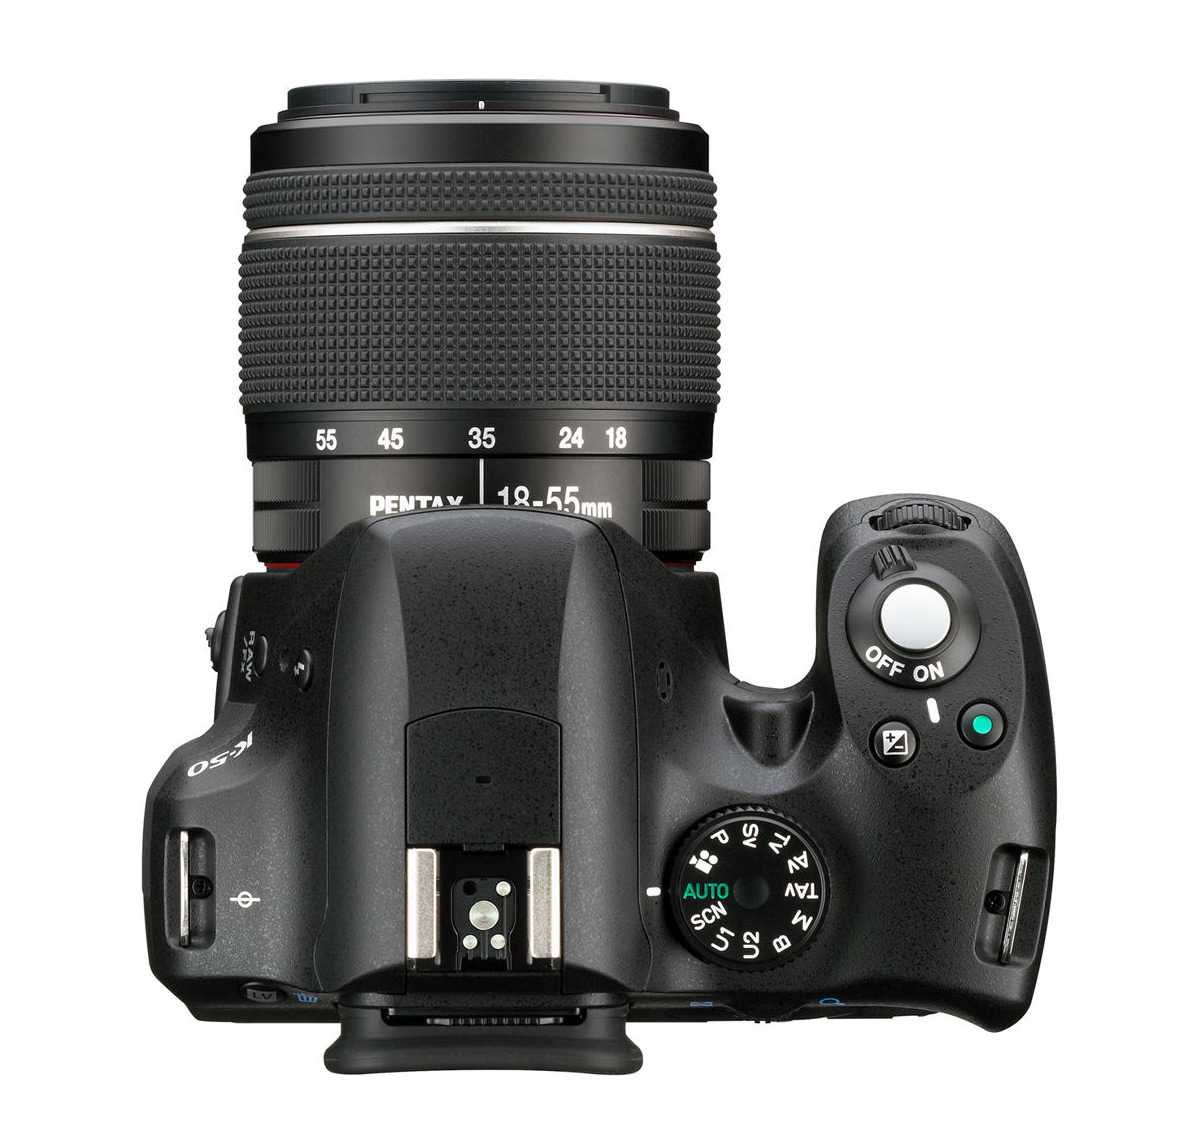 Pentax K-50 DSLR - Top View With 18-55mm Kit Lens